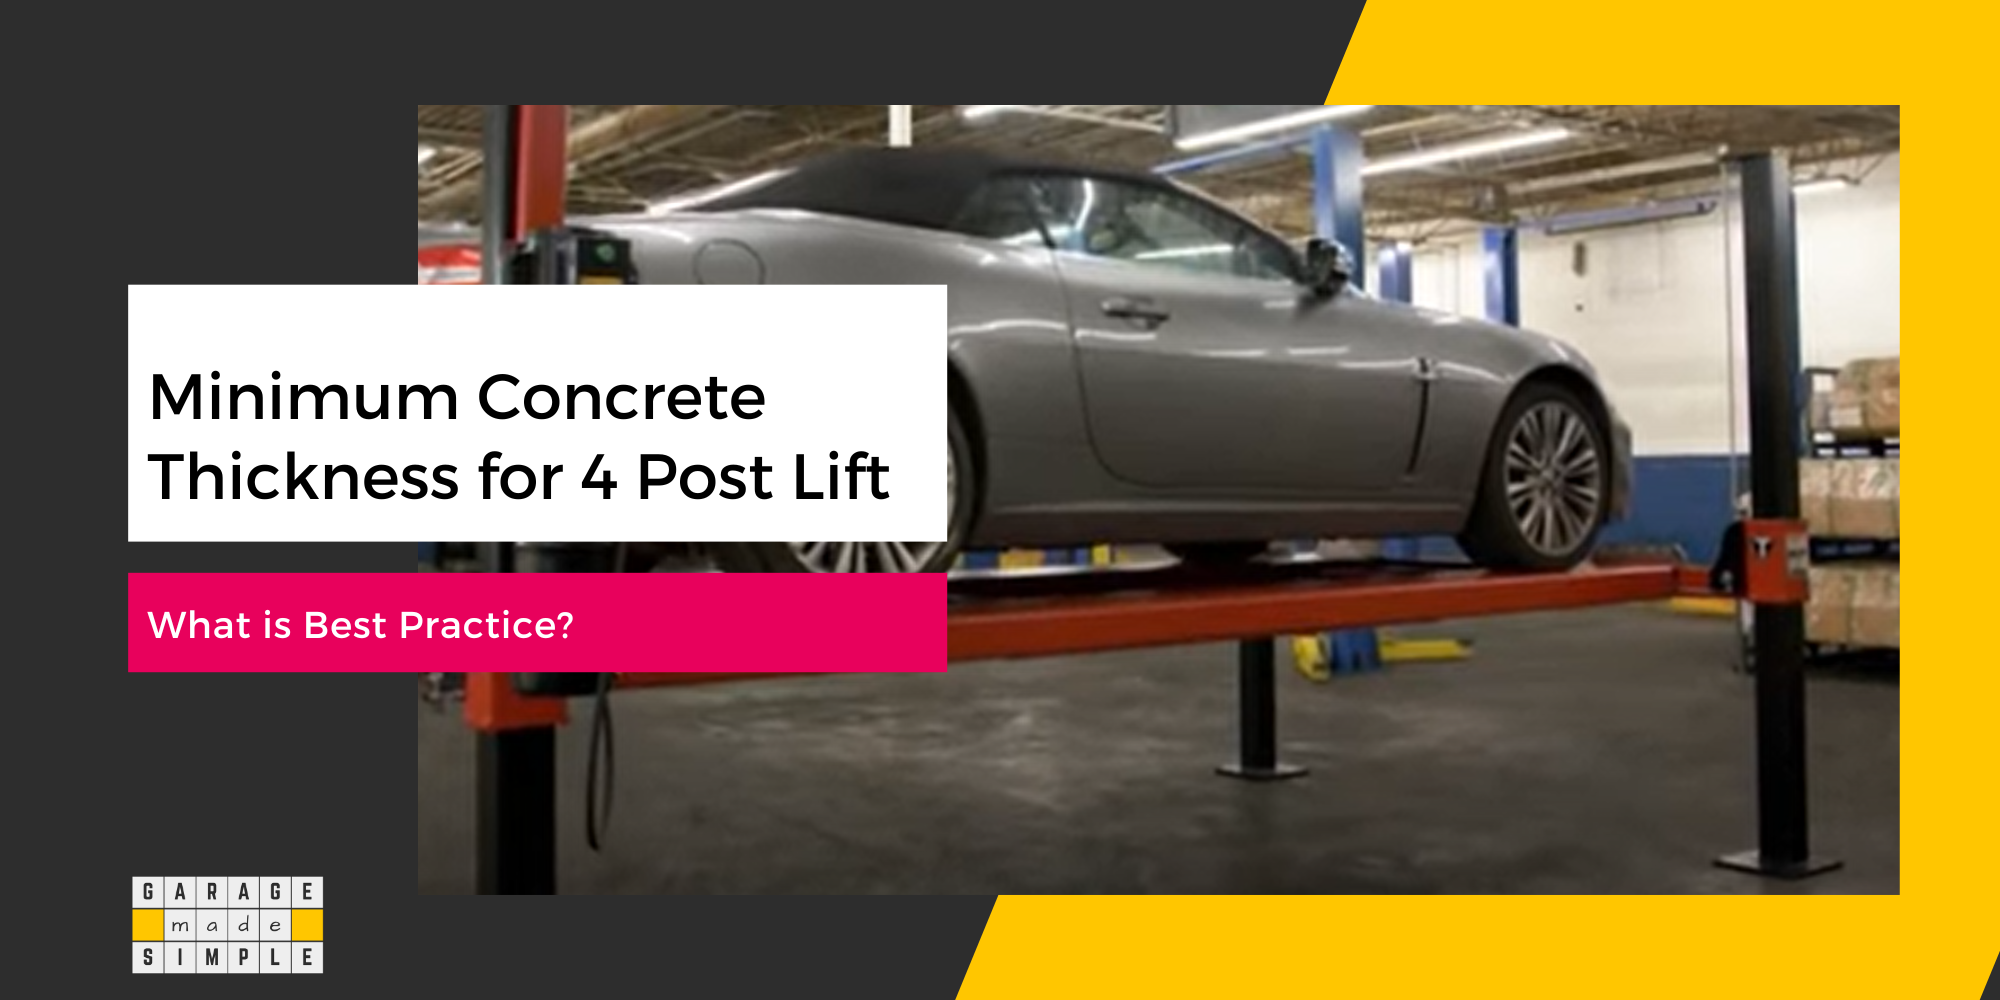 Minimum Concrete Thickness for 4 Post Lift: What Is Best Practice?